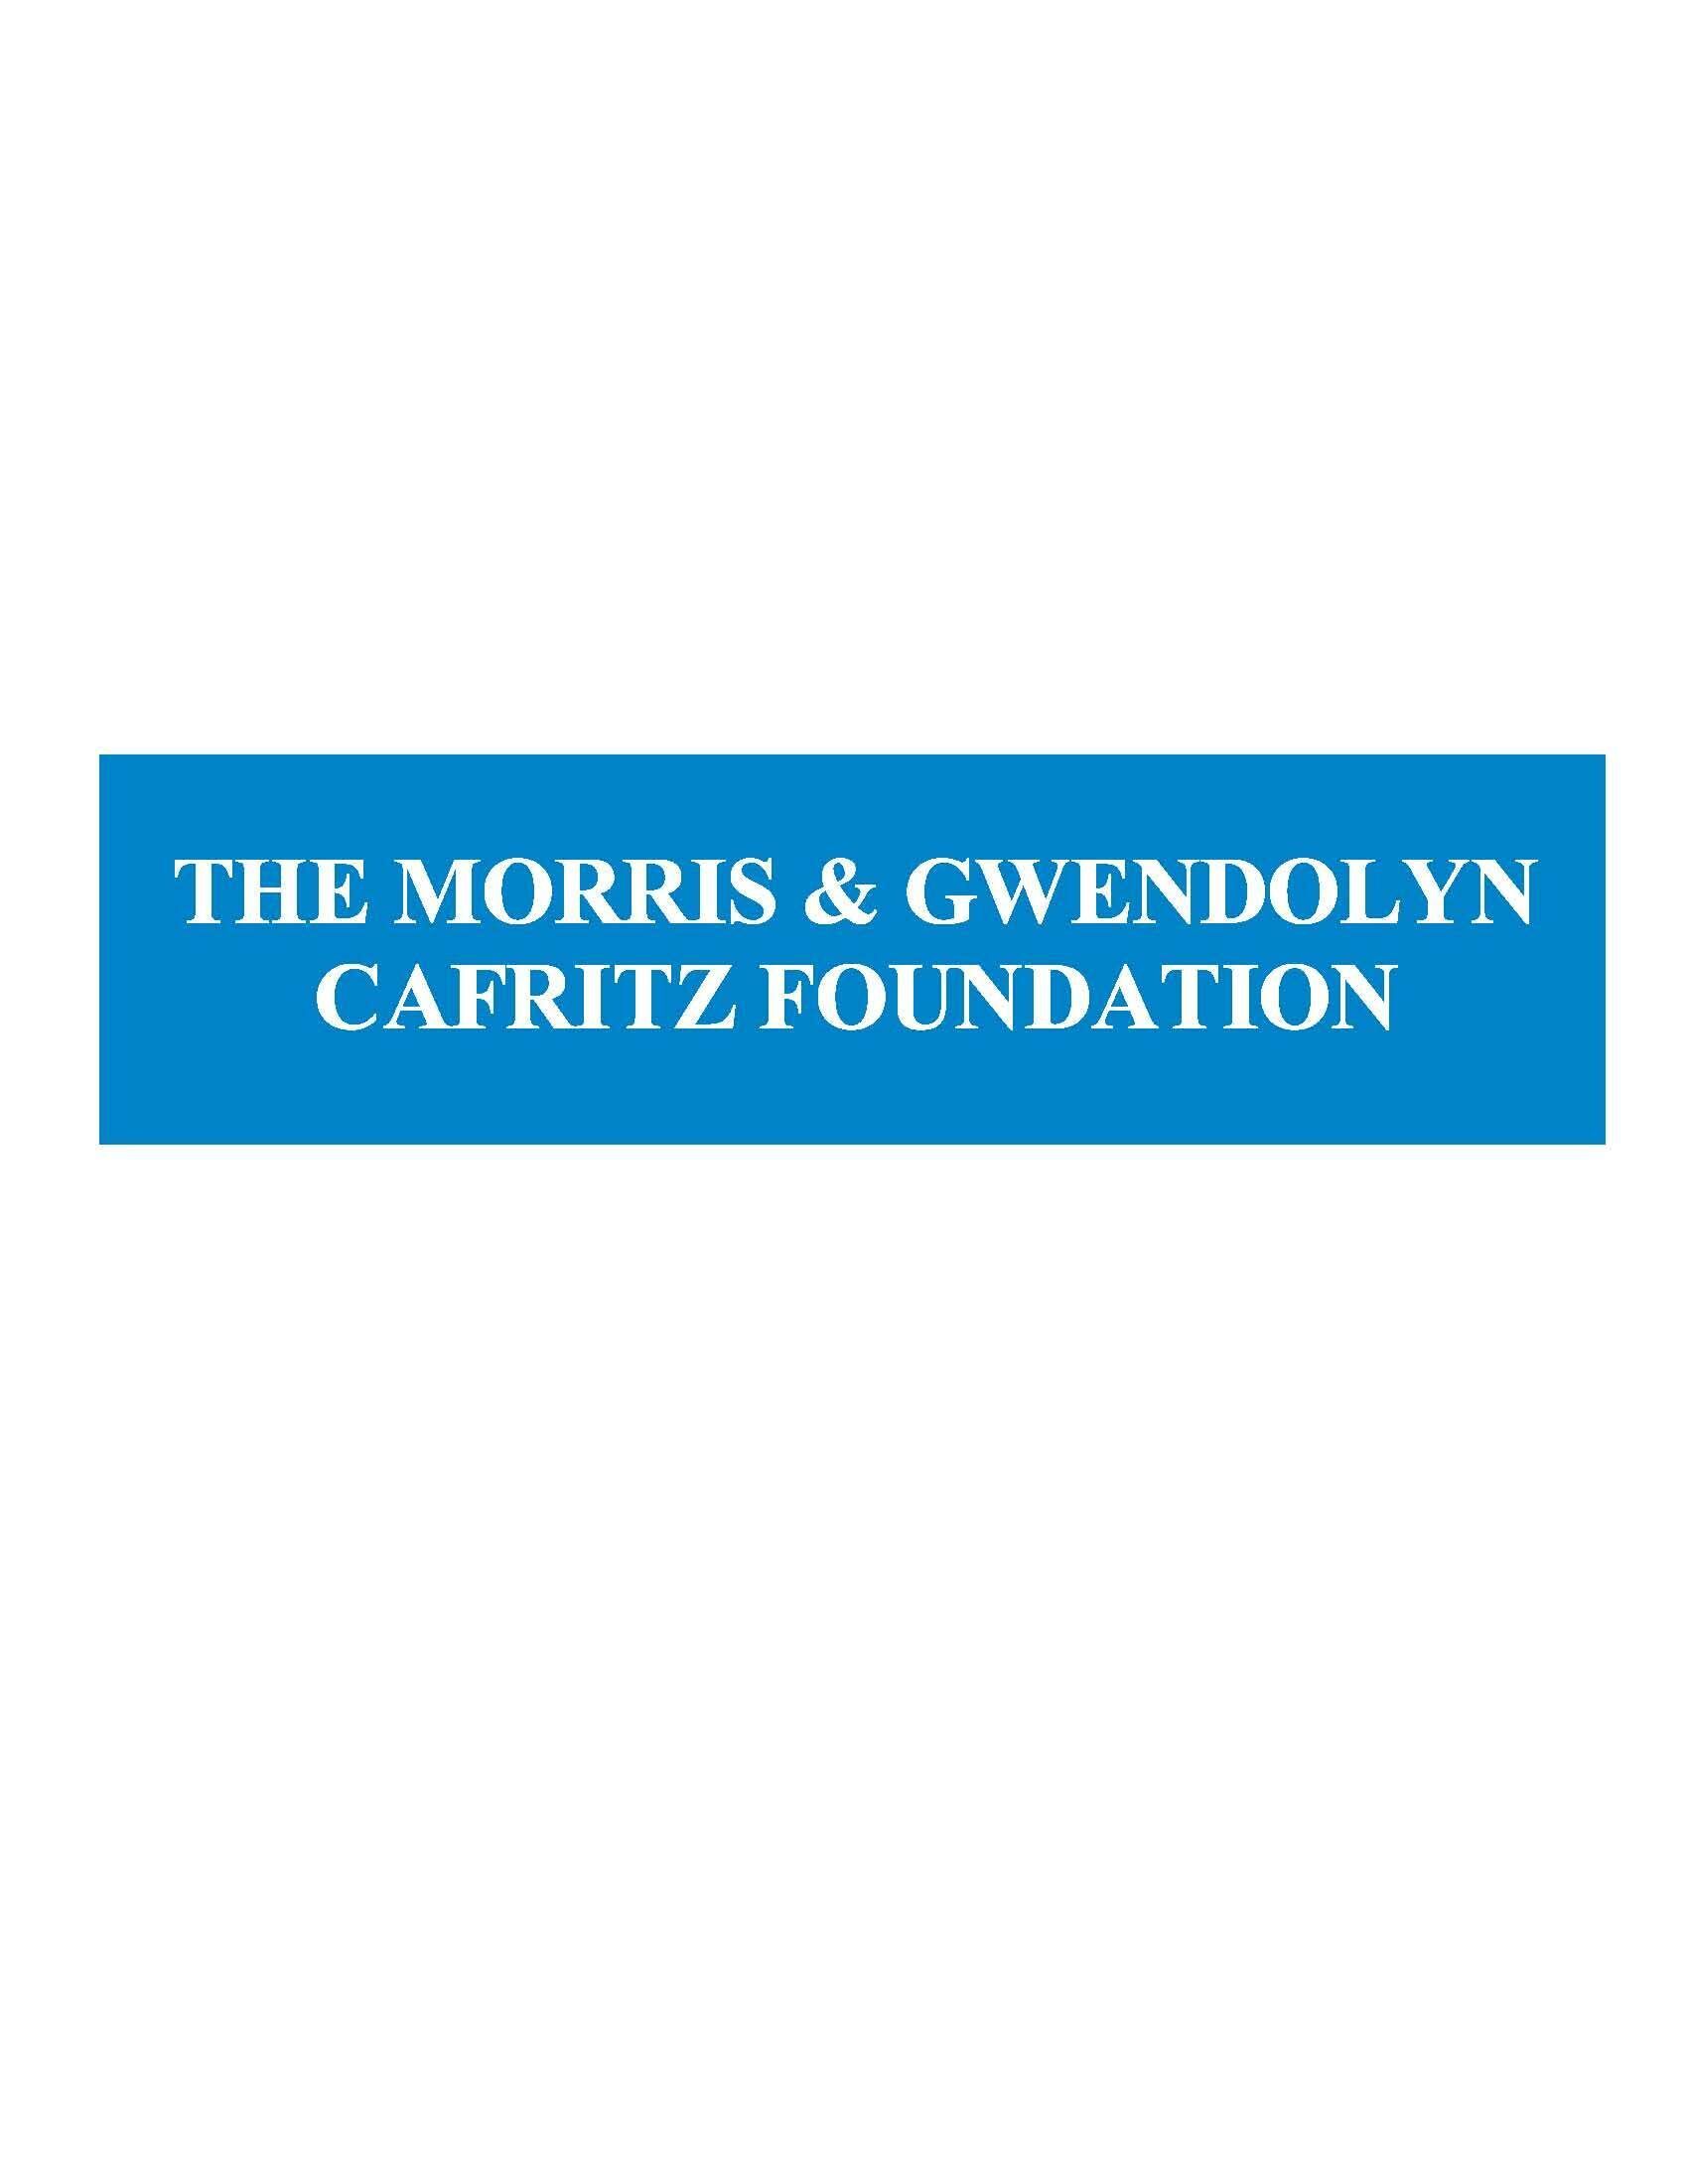 LSSNCA Receives The Morris and Gwendolyn Cafritz Foundation Grant: Strengthening Refugee and Immigrant Services